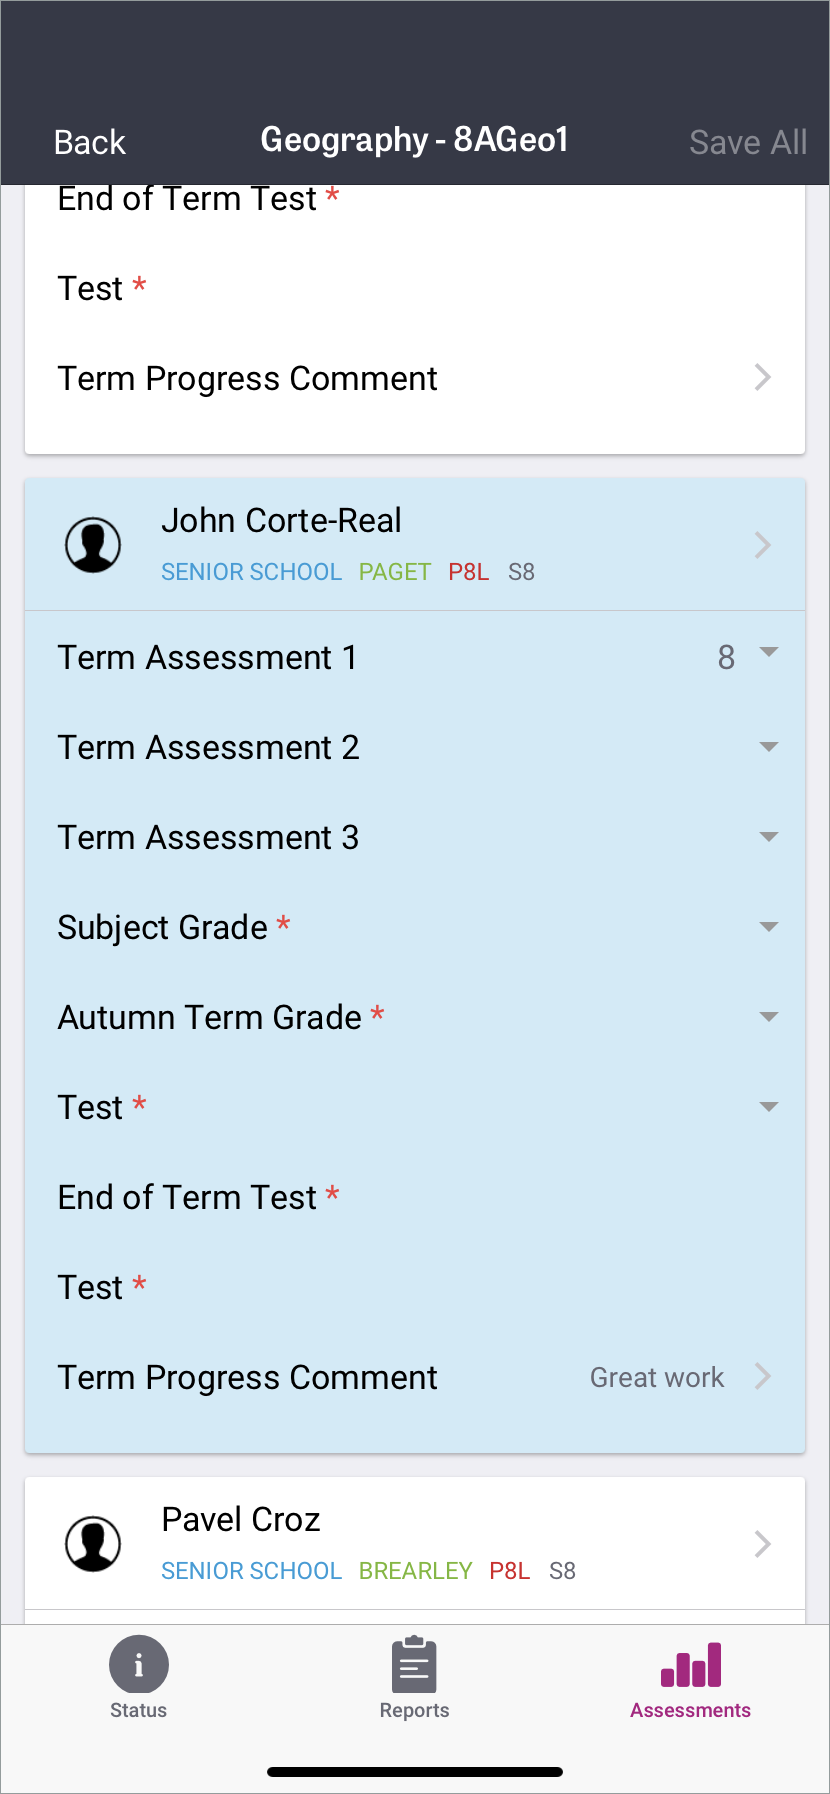 Completed assessments in student list